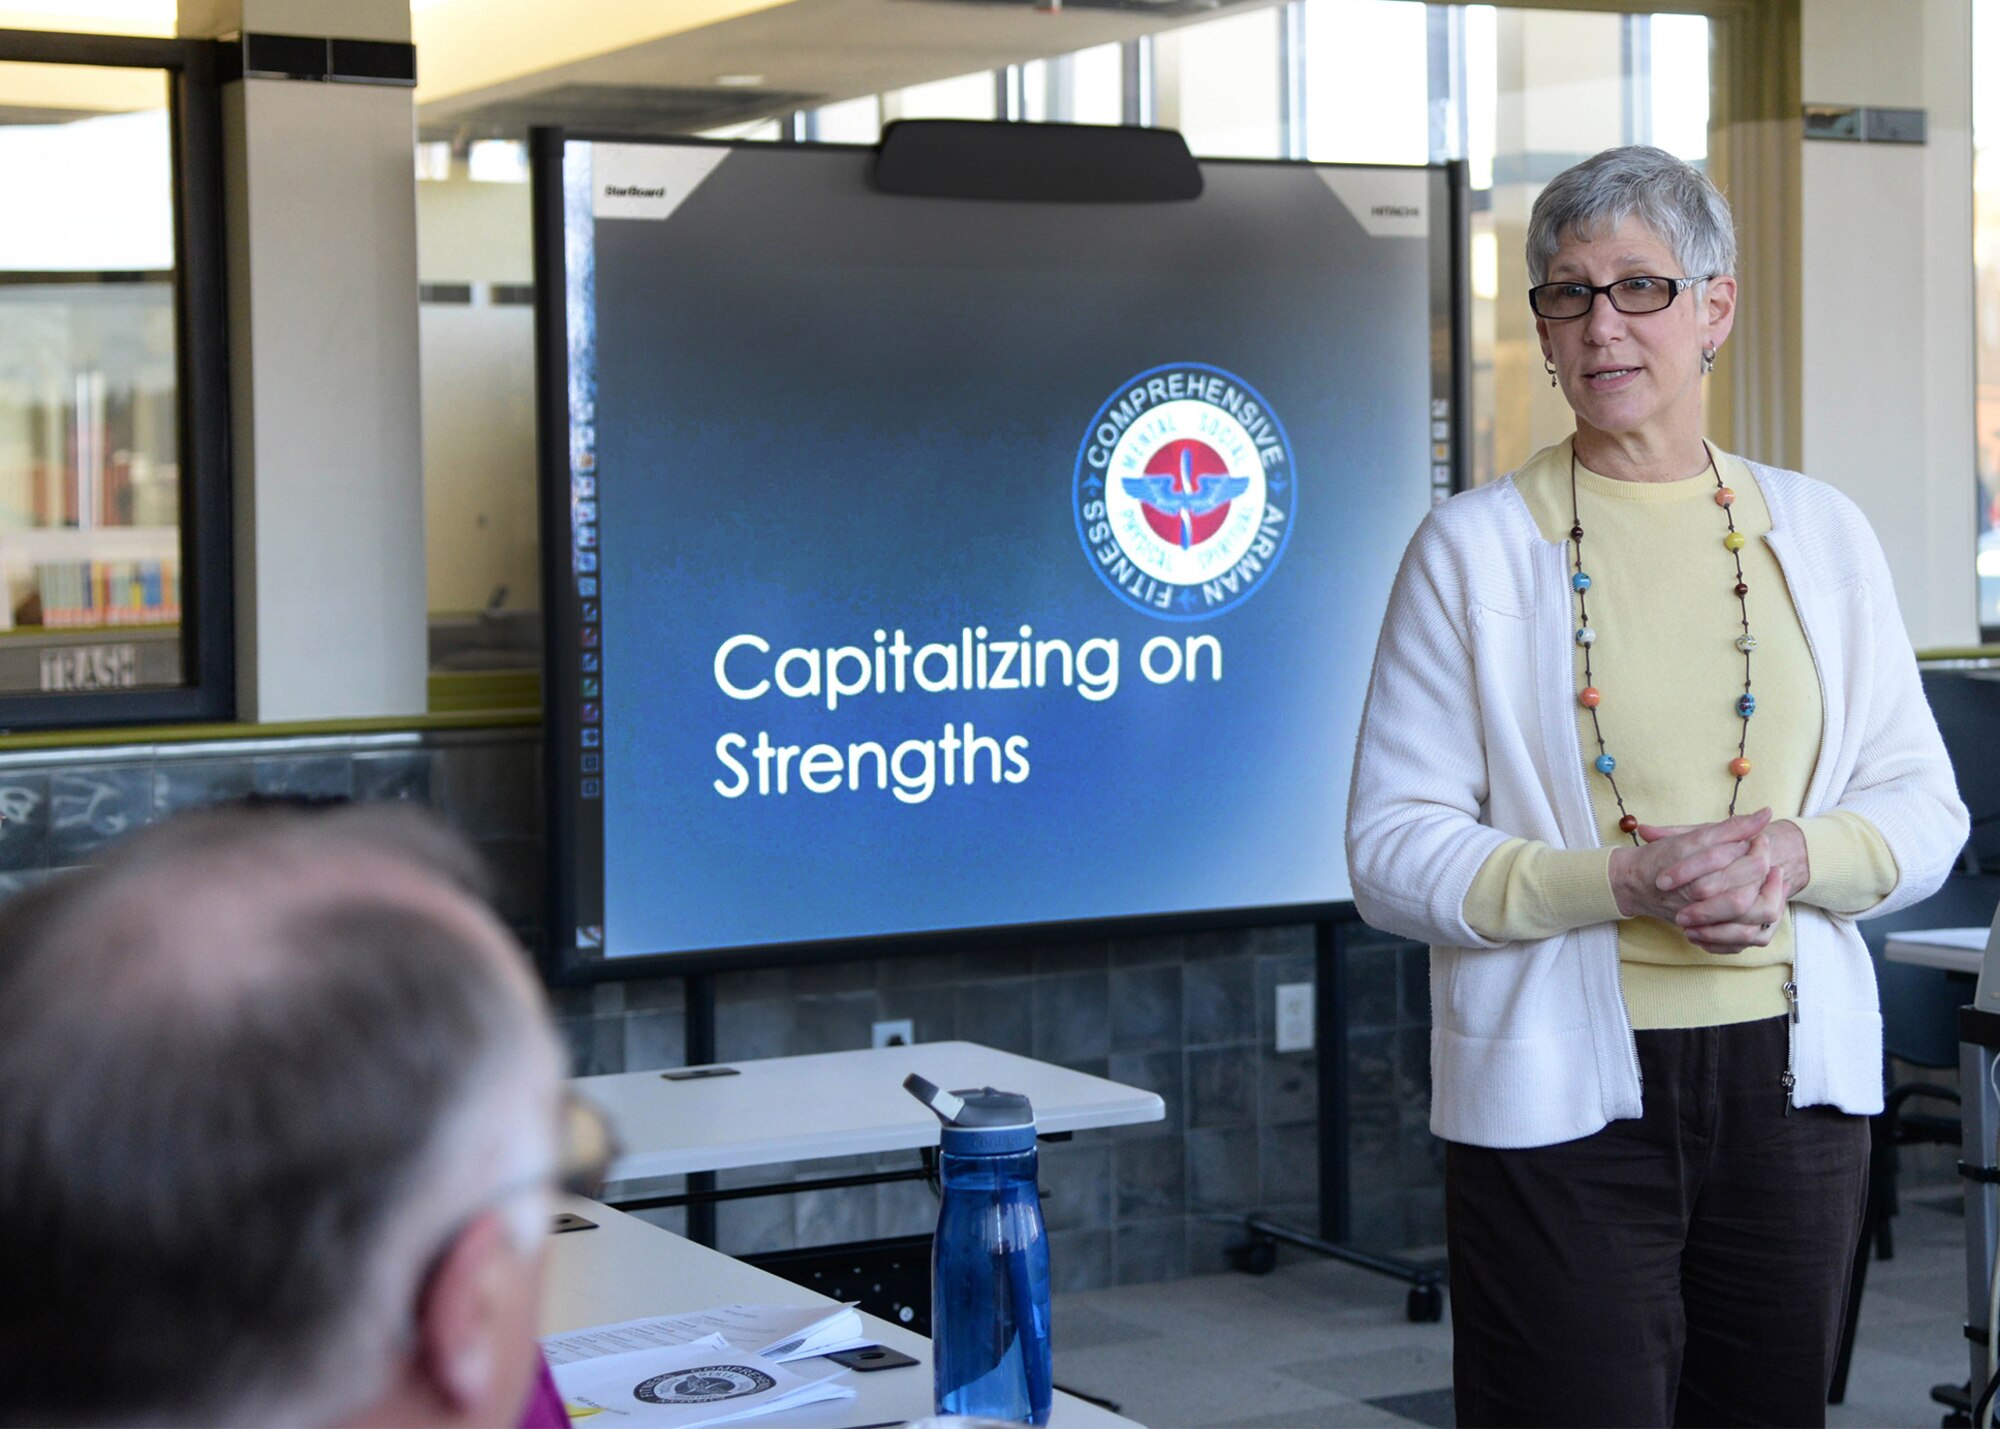 Carolyn McCafferty, Hanscom's community support coordinator, teaches a resiliency class for members of the community at Hanscom Air Force Base, Mass., March 29. In her role as community support cooridnator, McCafferty leads a cross-functional team of support agencies as part of the Integrated Delivery System, or "H2O - Hanscom's Helping Organizations." (U.S. Air Force photo by Linda LaBonte Britt)